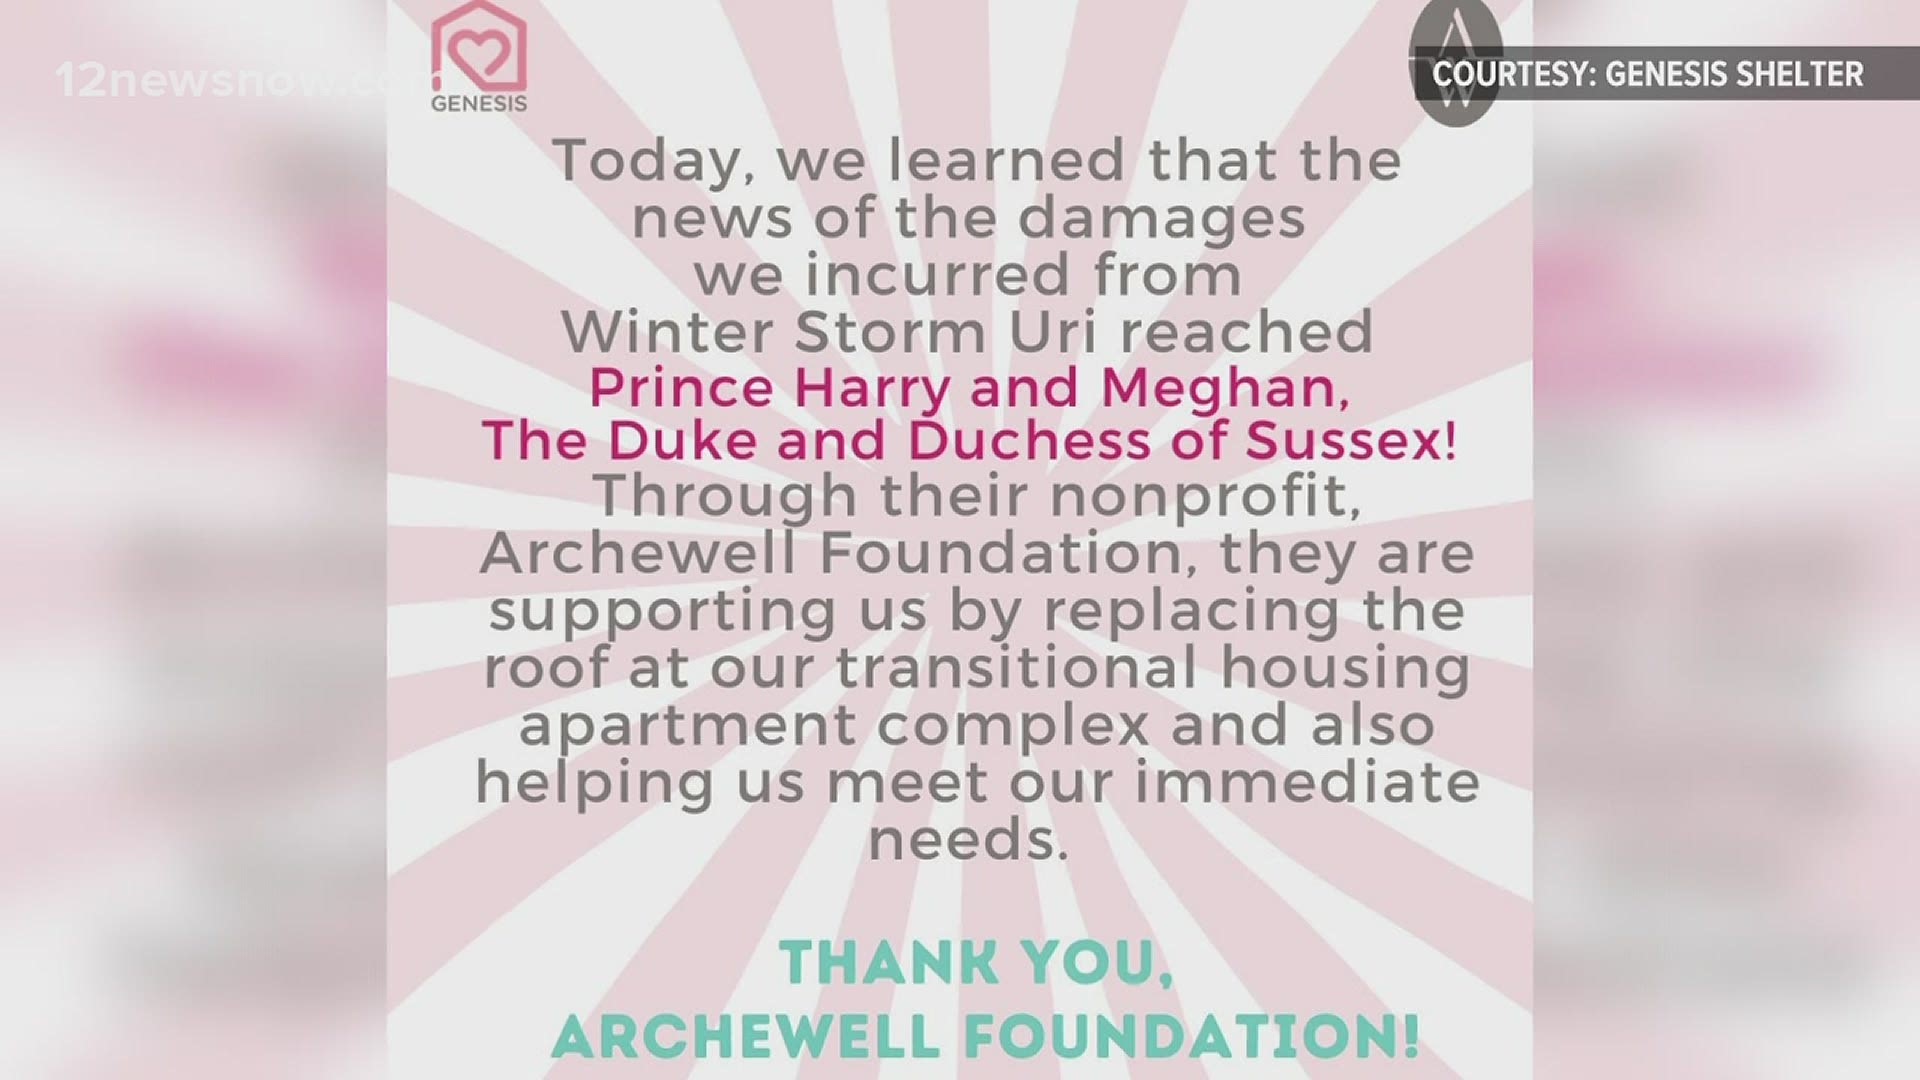 Prince Harry and Meghan Markle are also sending help to Texas. Genesis Women's Shelter and Support said in a tweet the couple would replace the shelter's roof.